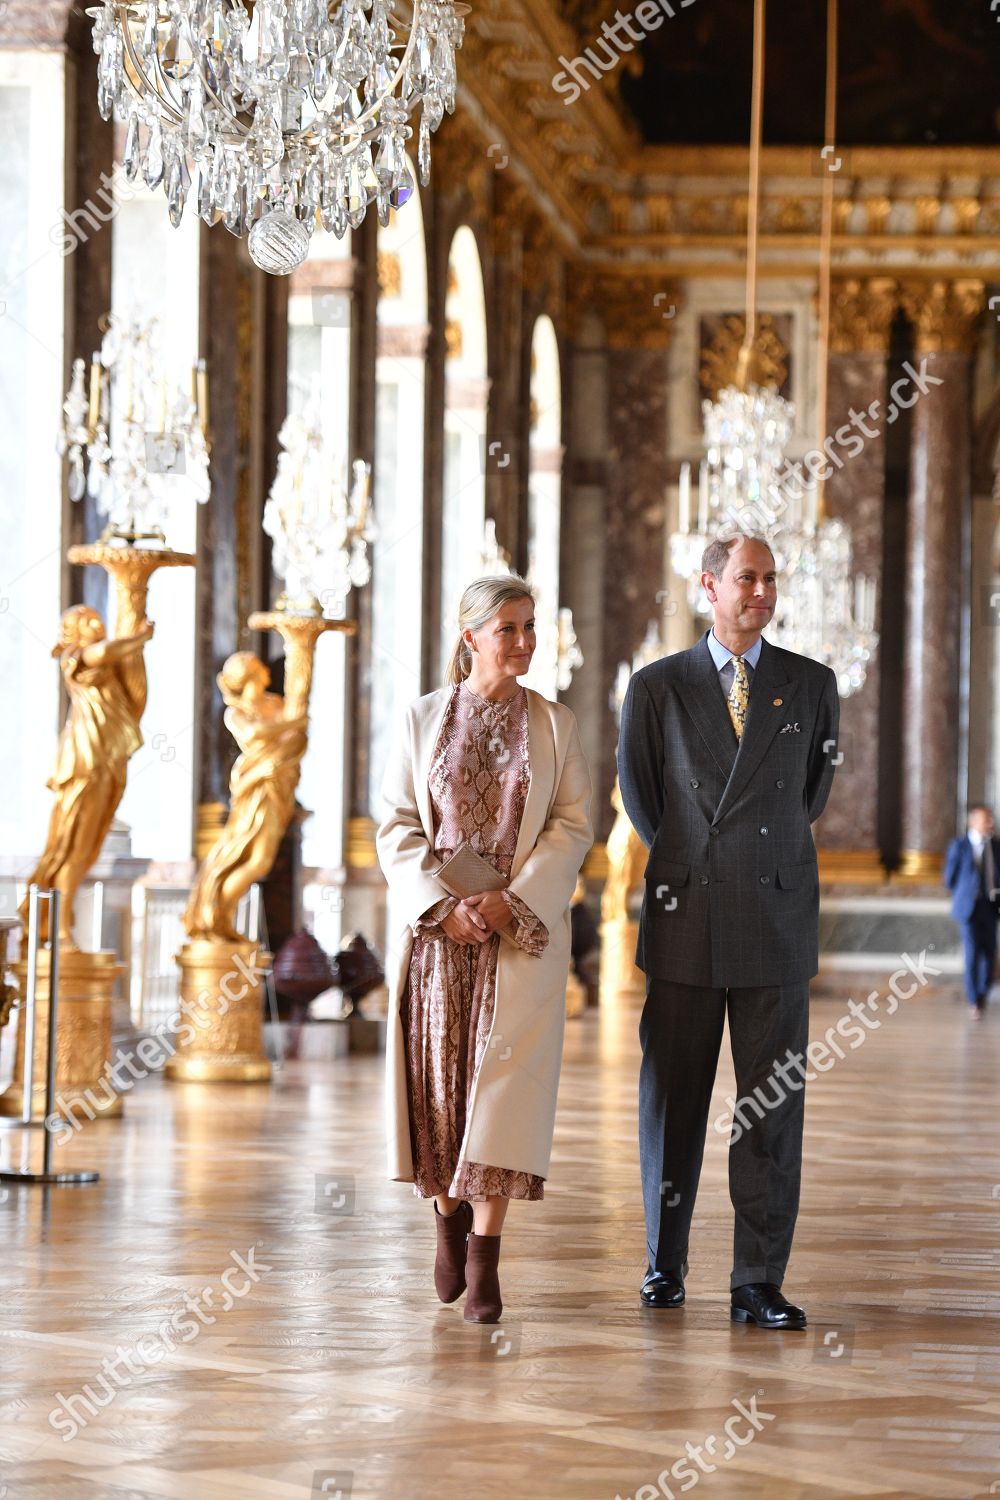 prince-edward-and-sophie-countess-of-wessex-visit-to-paris-france-shutterstock-editorial-9907868y.jpg